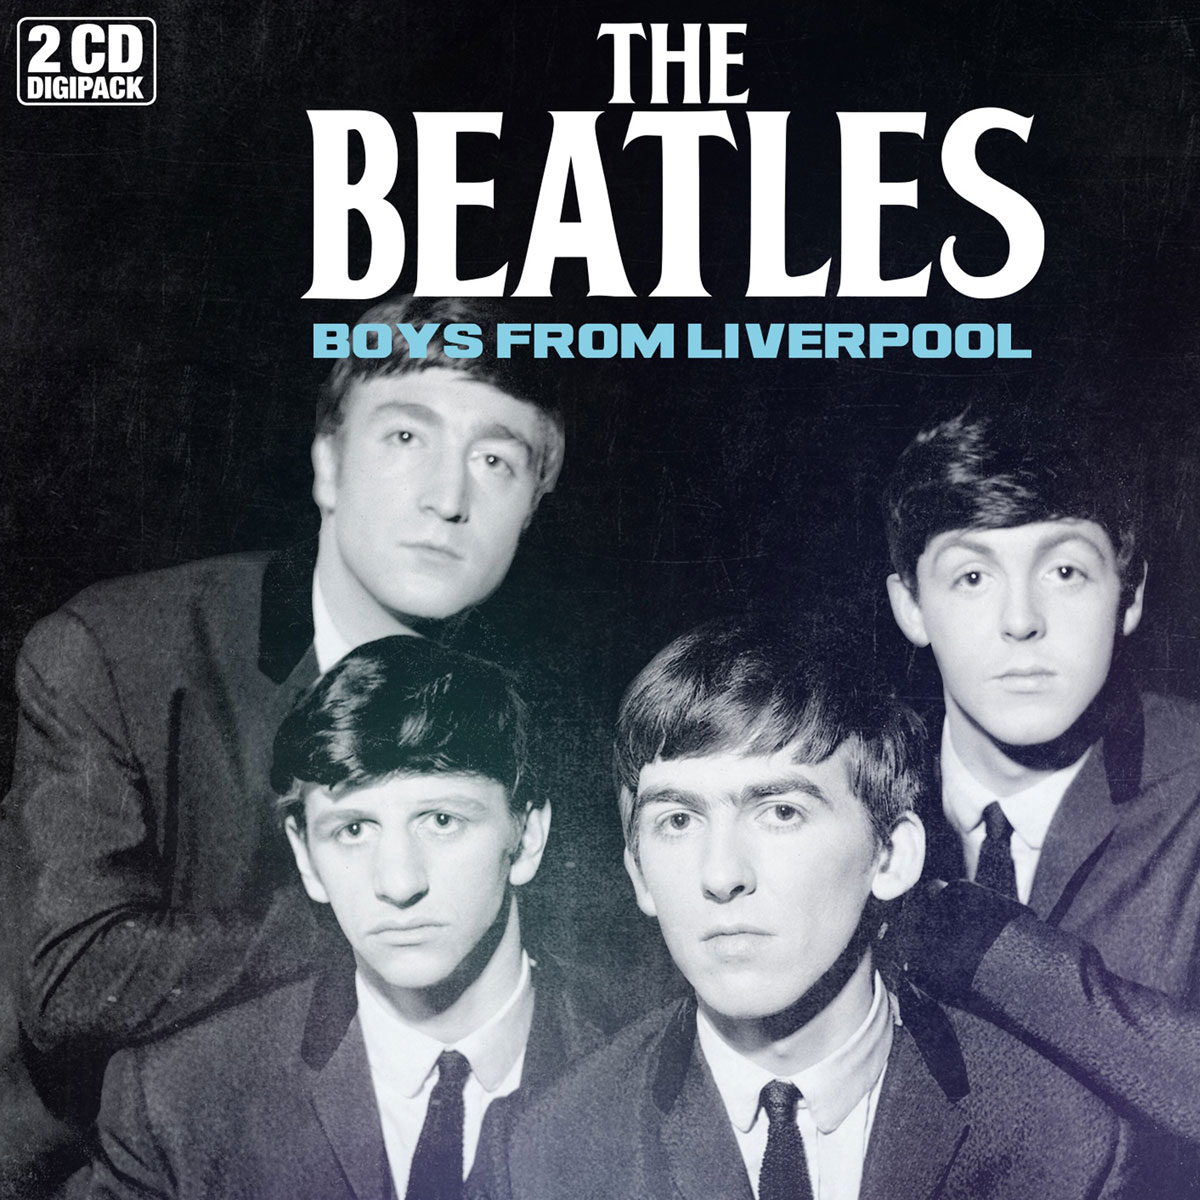 THE BEATLES - Boys From Liverpool